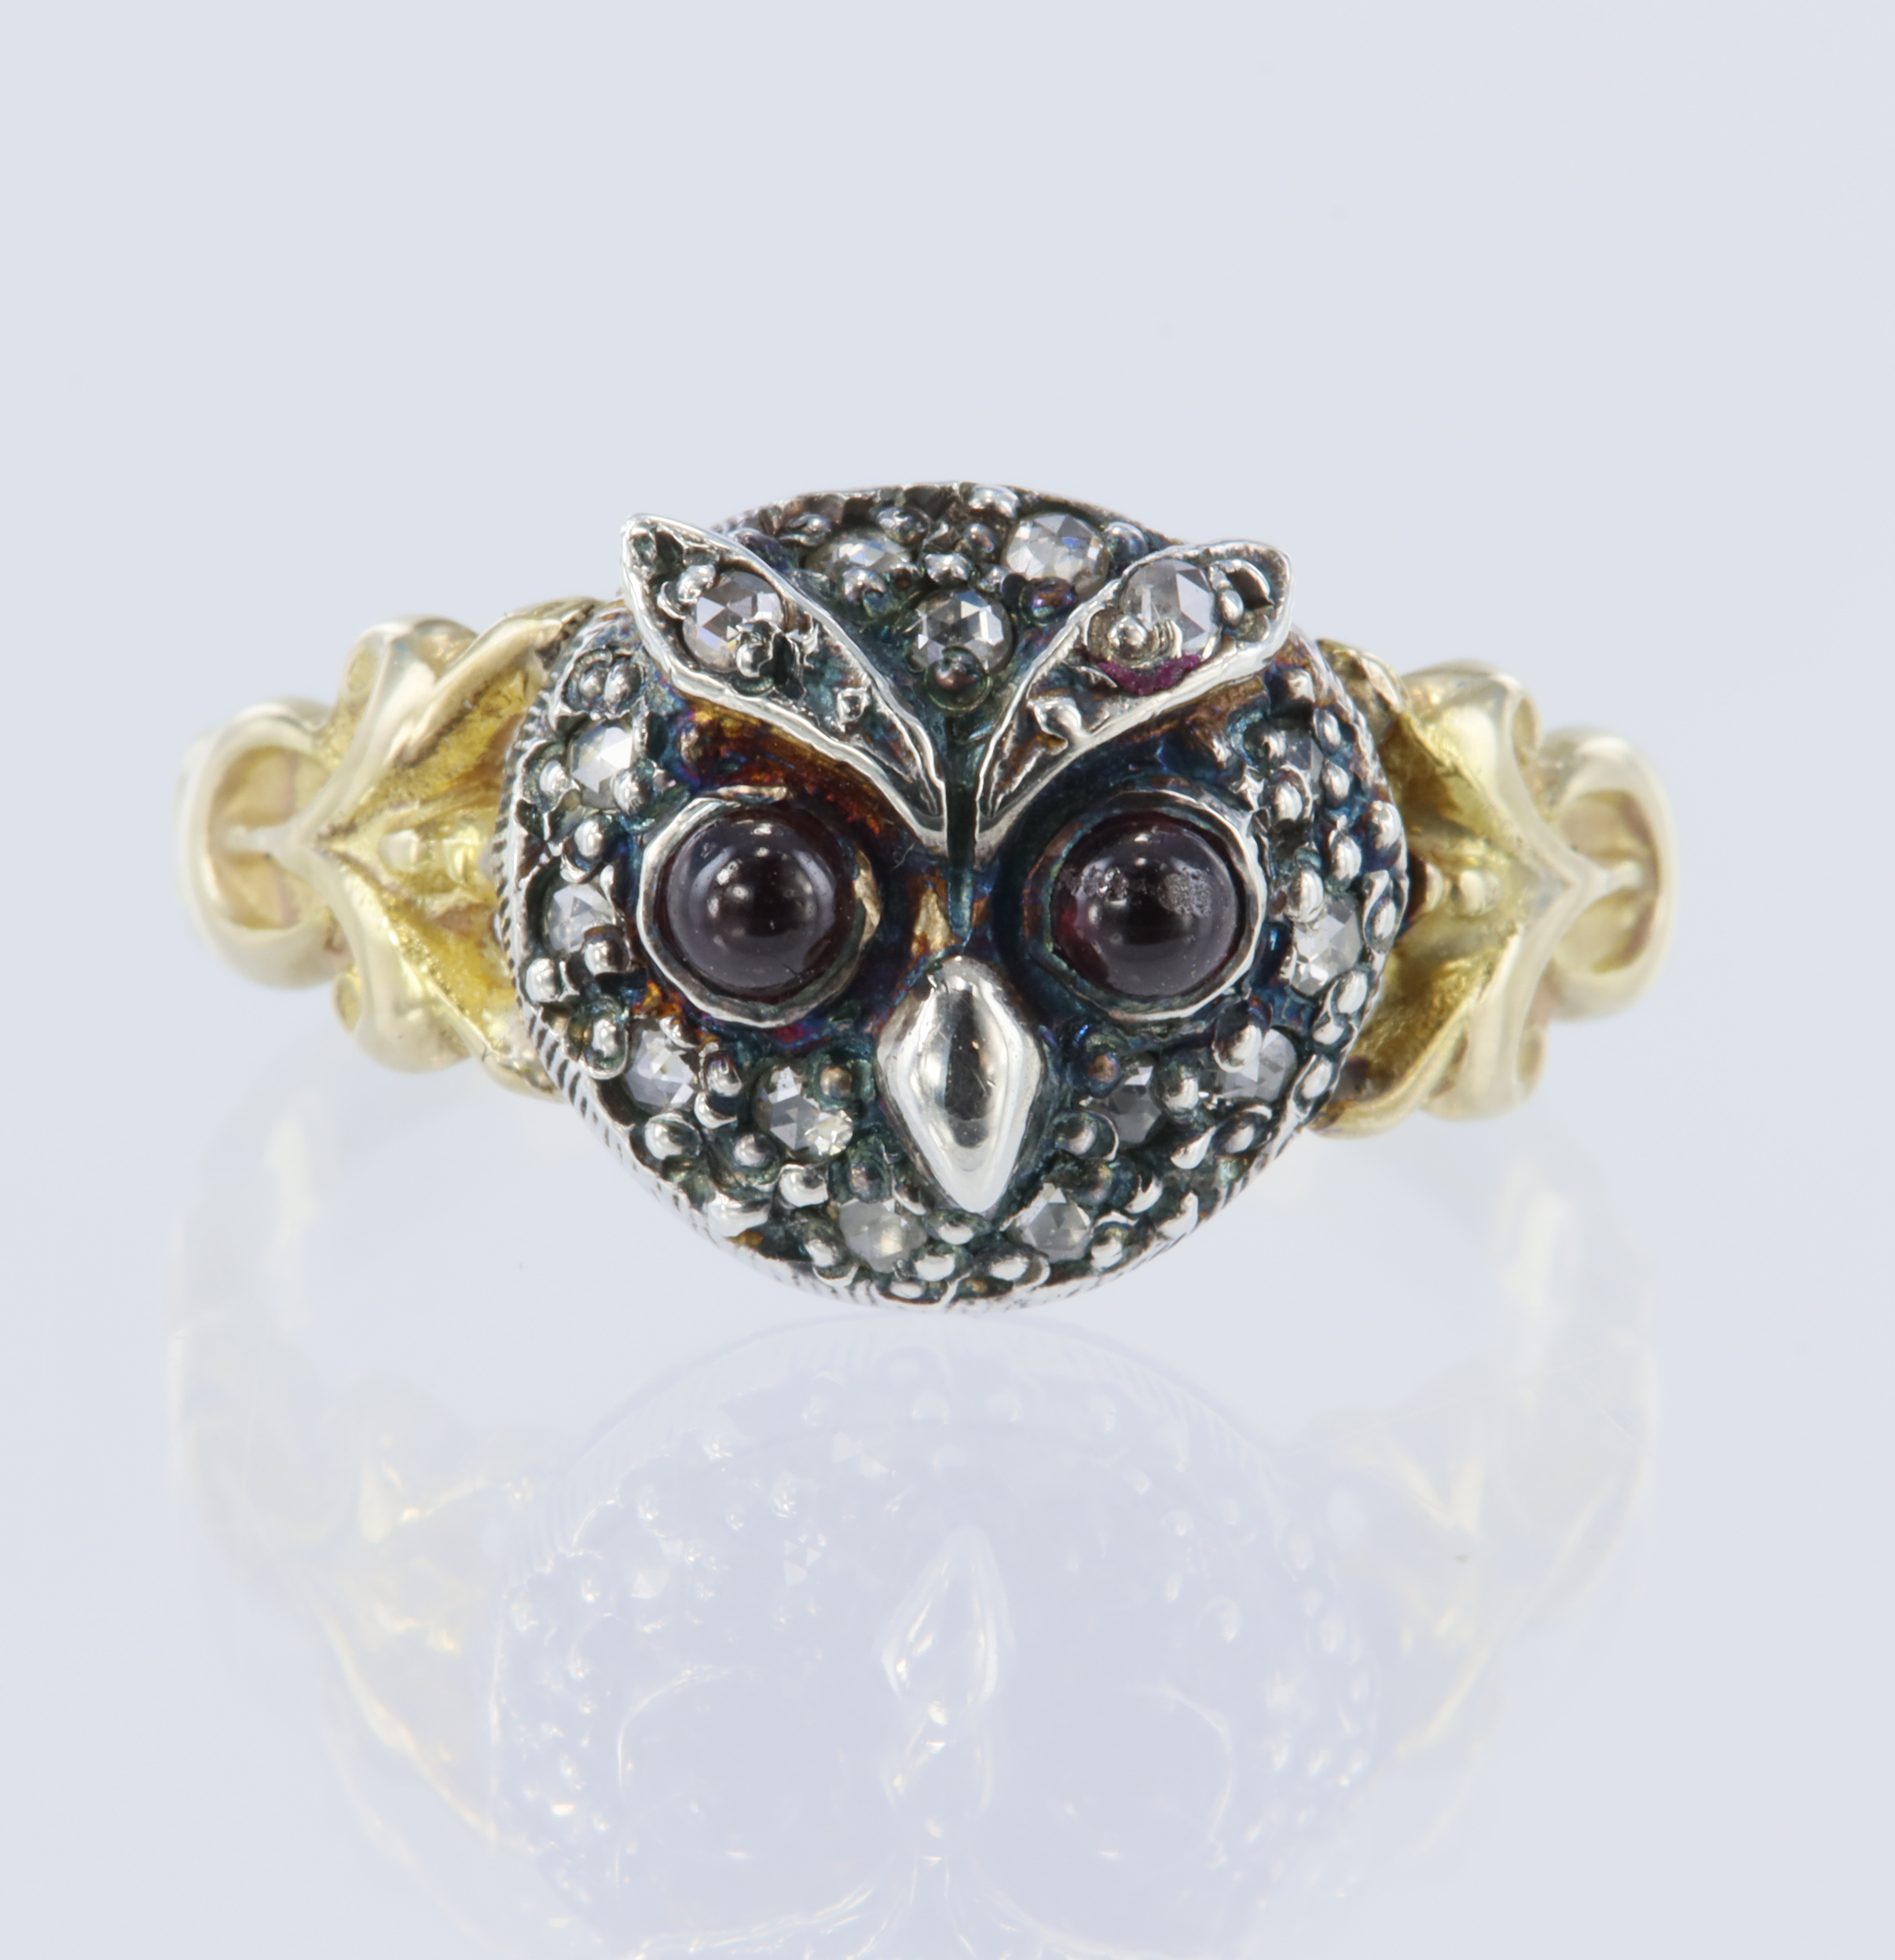 Yellow gold (tests 14ct) owl ring, set with cabochon garnet eyes measuring 2.5mm each, surrounded